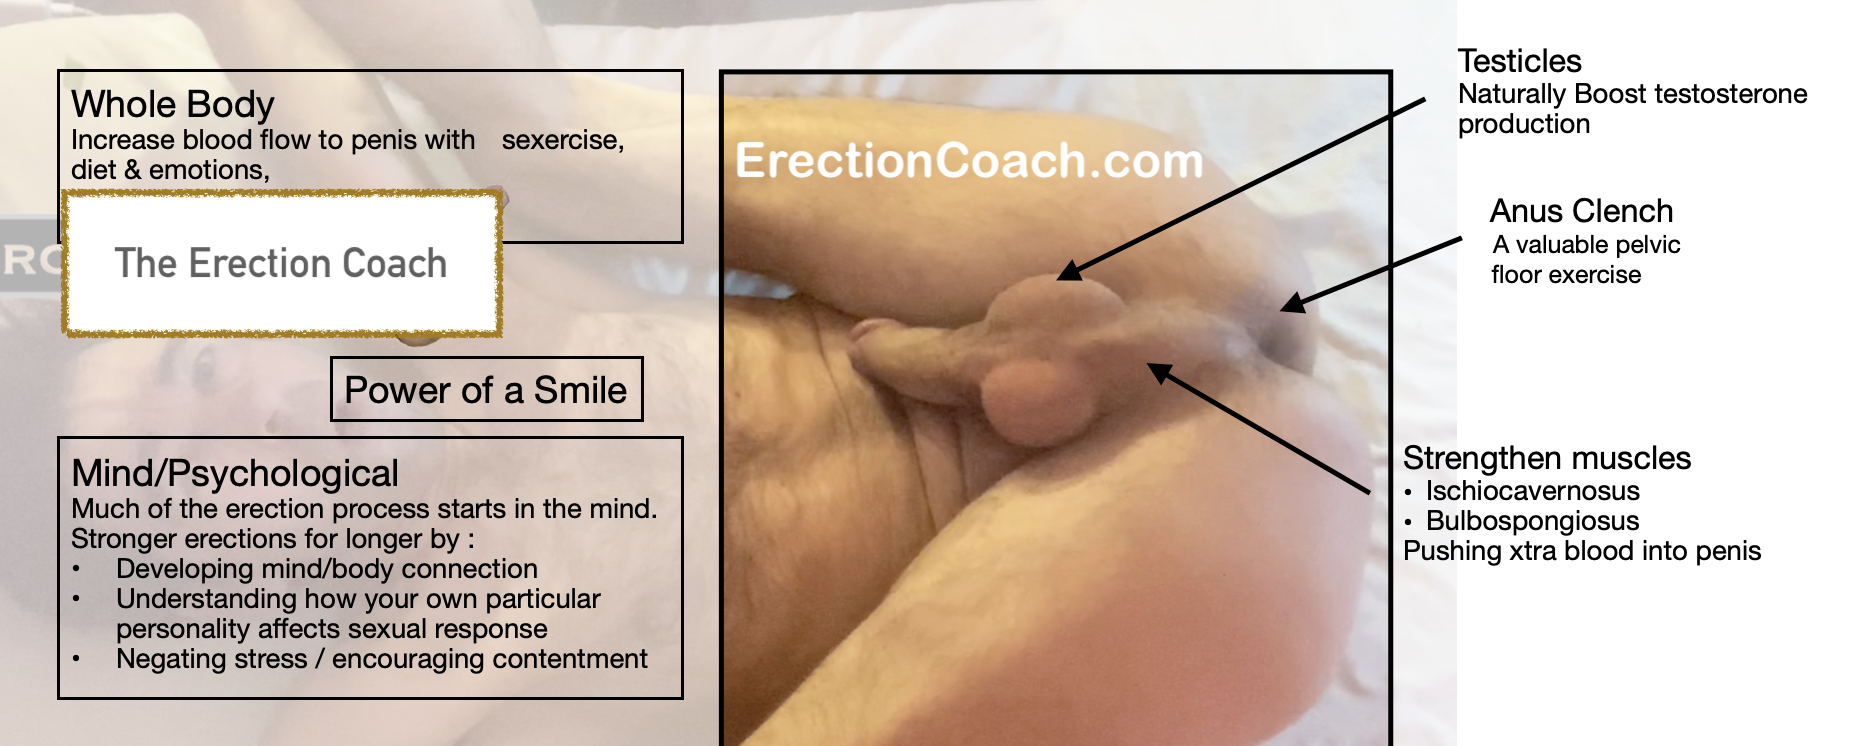 erection coach naked laying on back with legs over his head to show male pelvic floor muscles